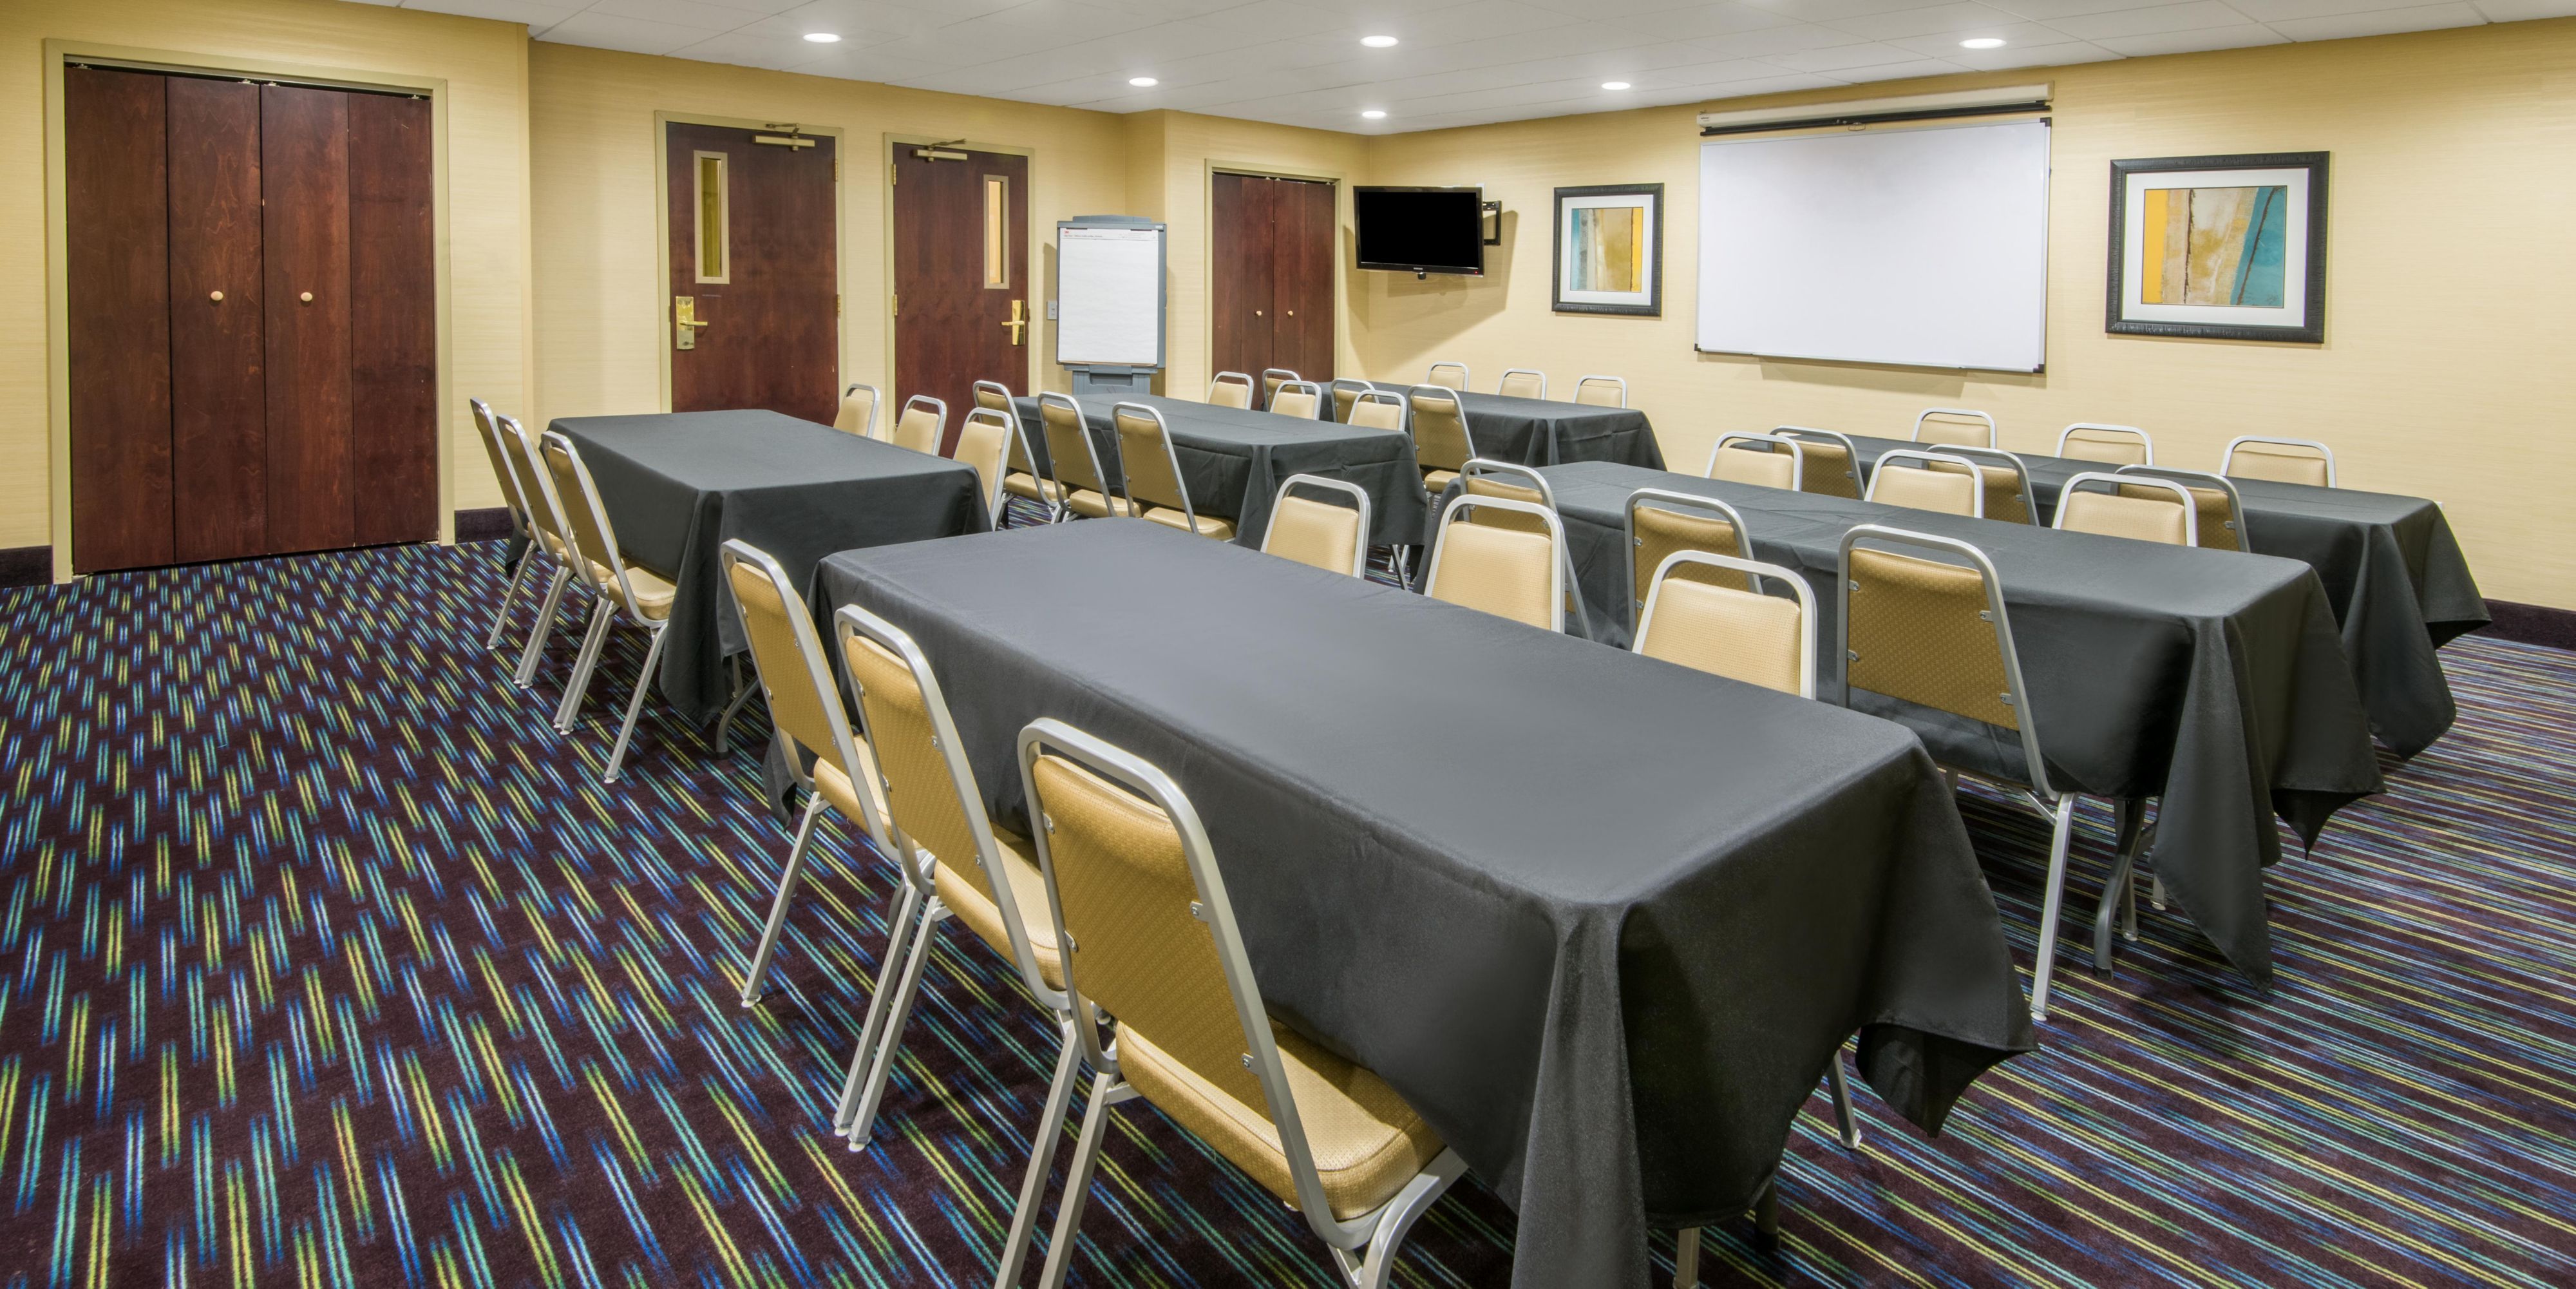 Small meetings play a vital role in the success of many organizations. Are you planning a small corporate meeting, board retreat or brainstorming session? Our 625 square feet meeting room is sure to lead to big ideas! 

